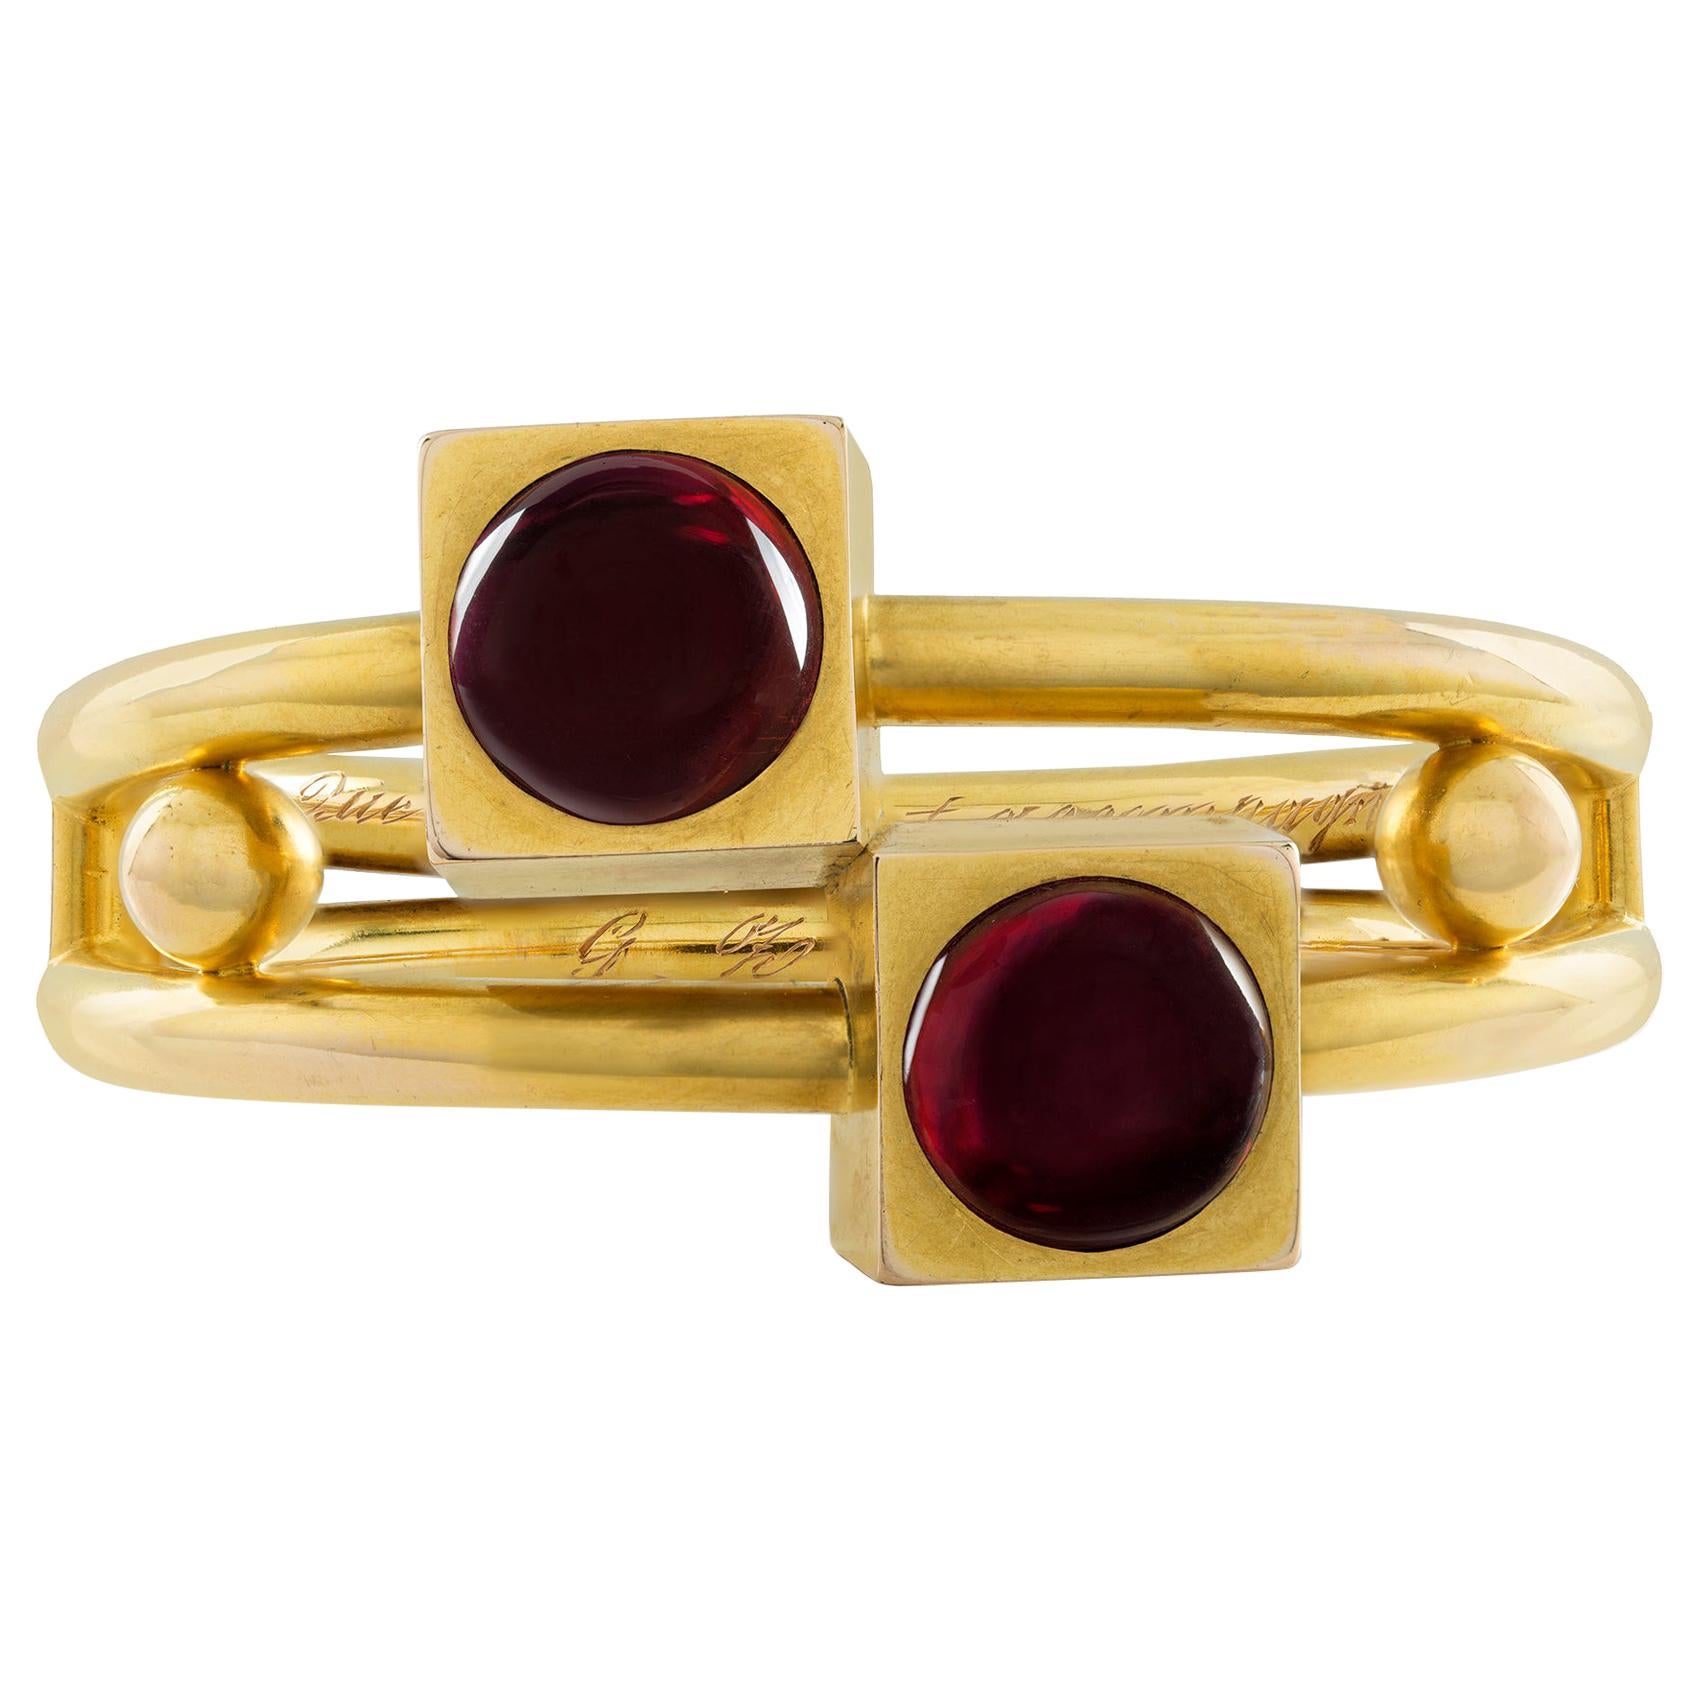 A Late Nineteenth Century Gold and Garnet Bangle For Sale